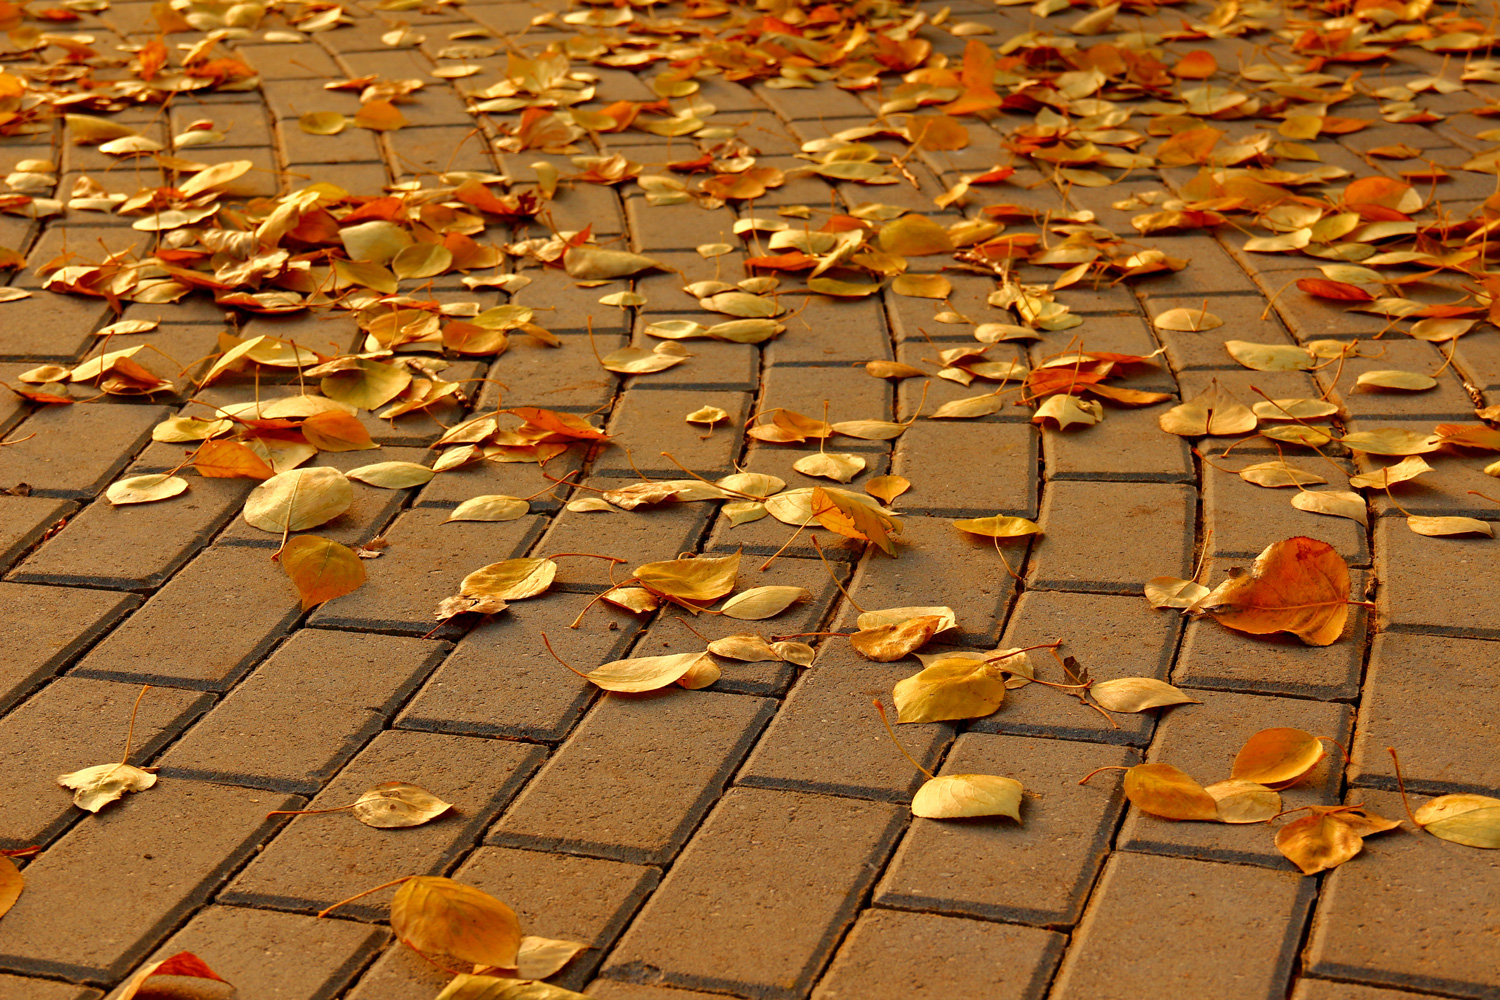 Stone pavement in golden autumn leaves. Shallow depth of field